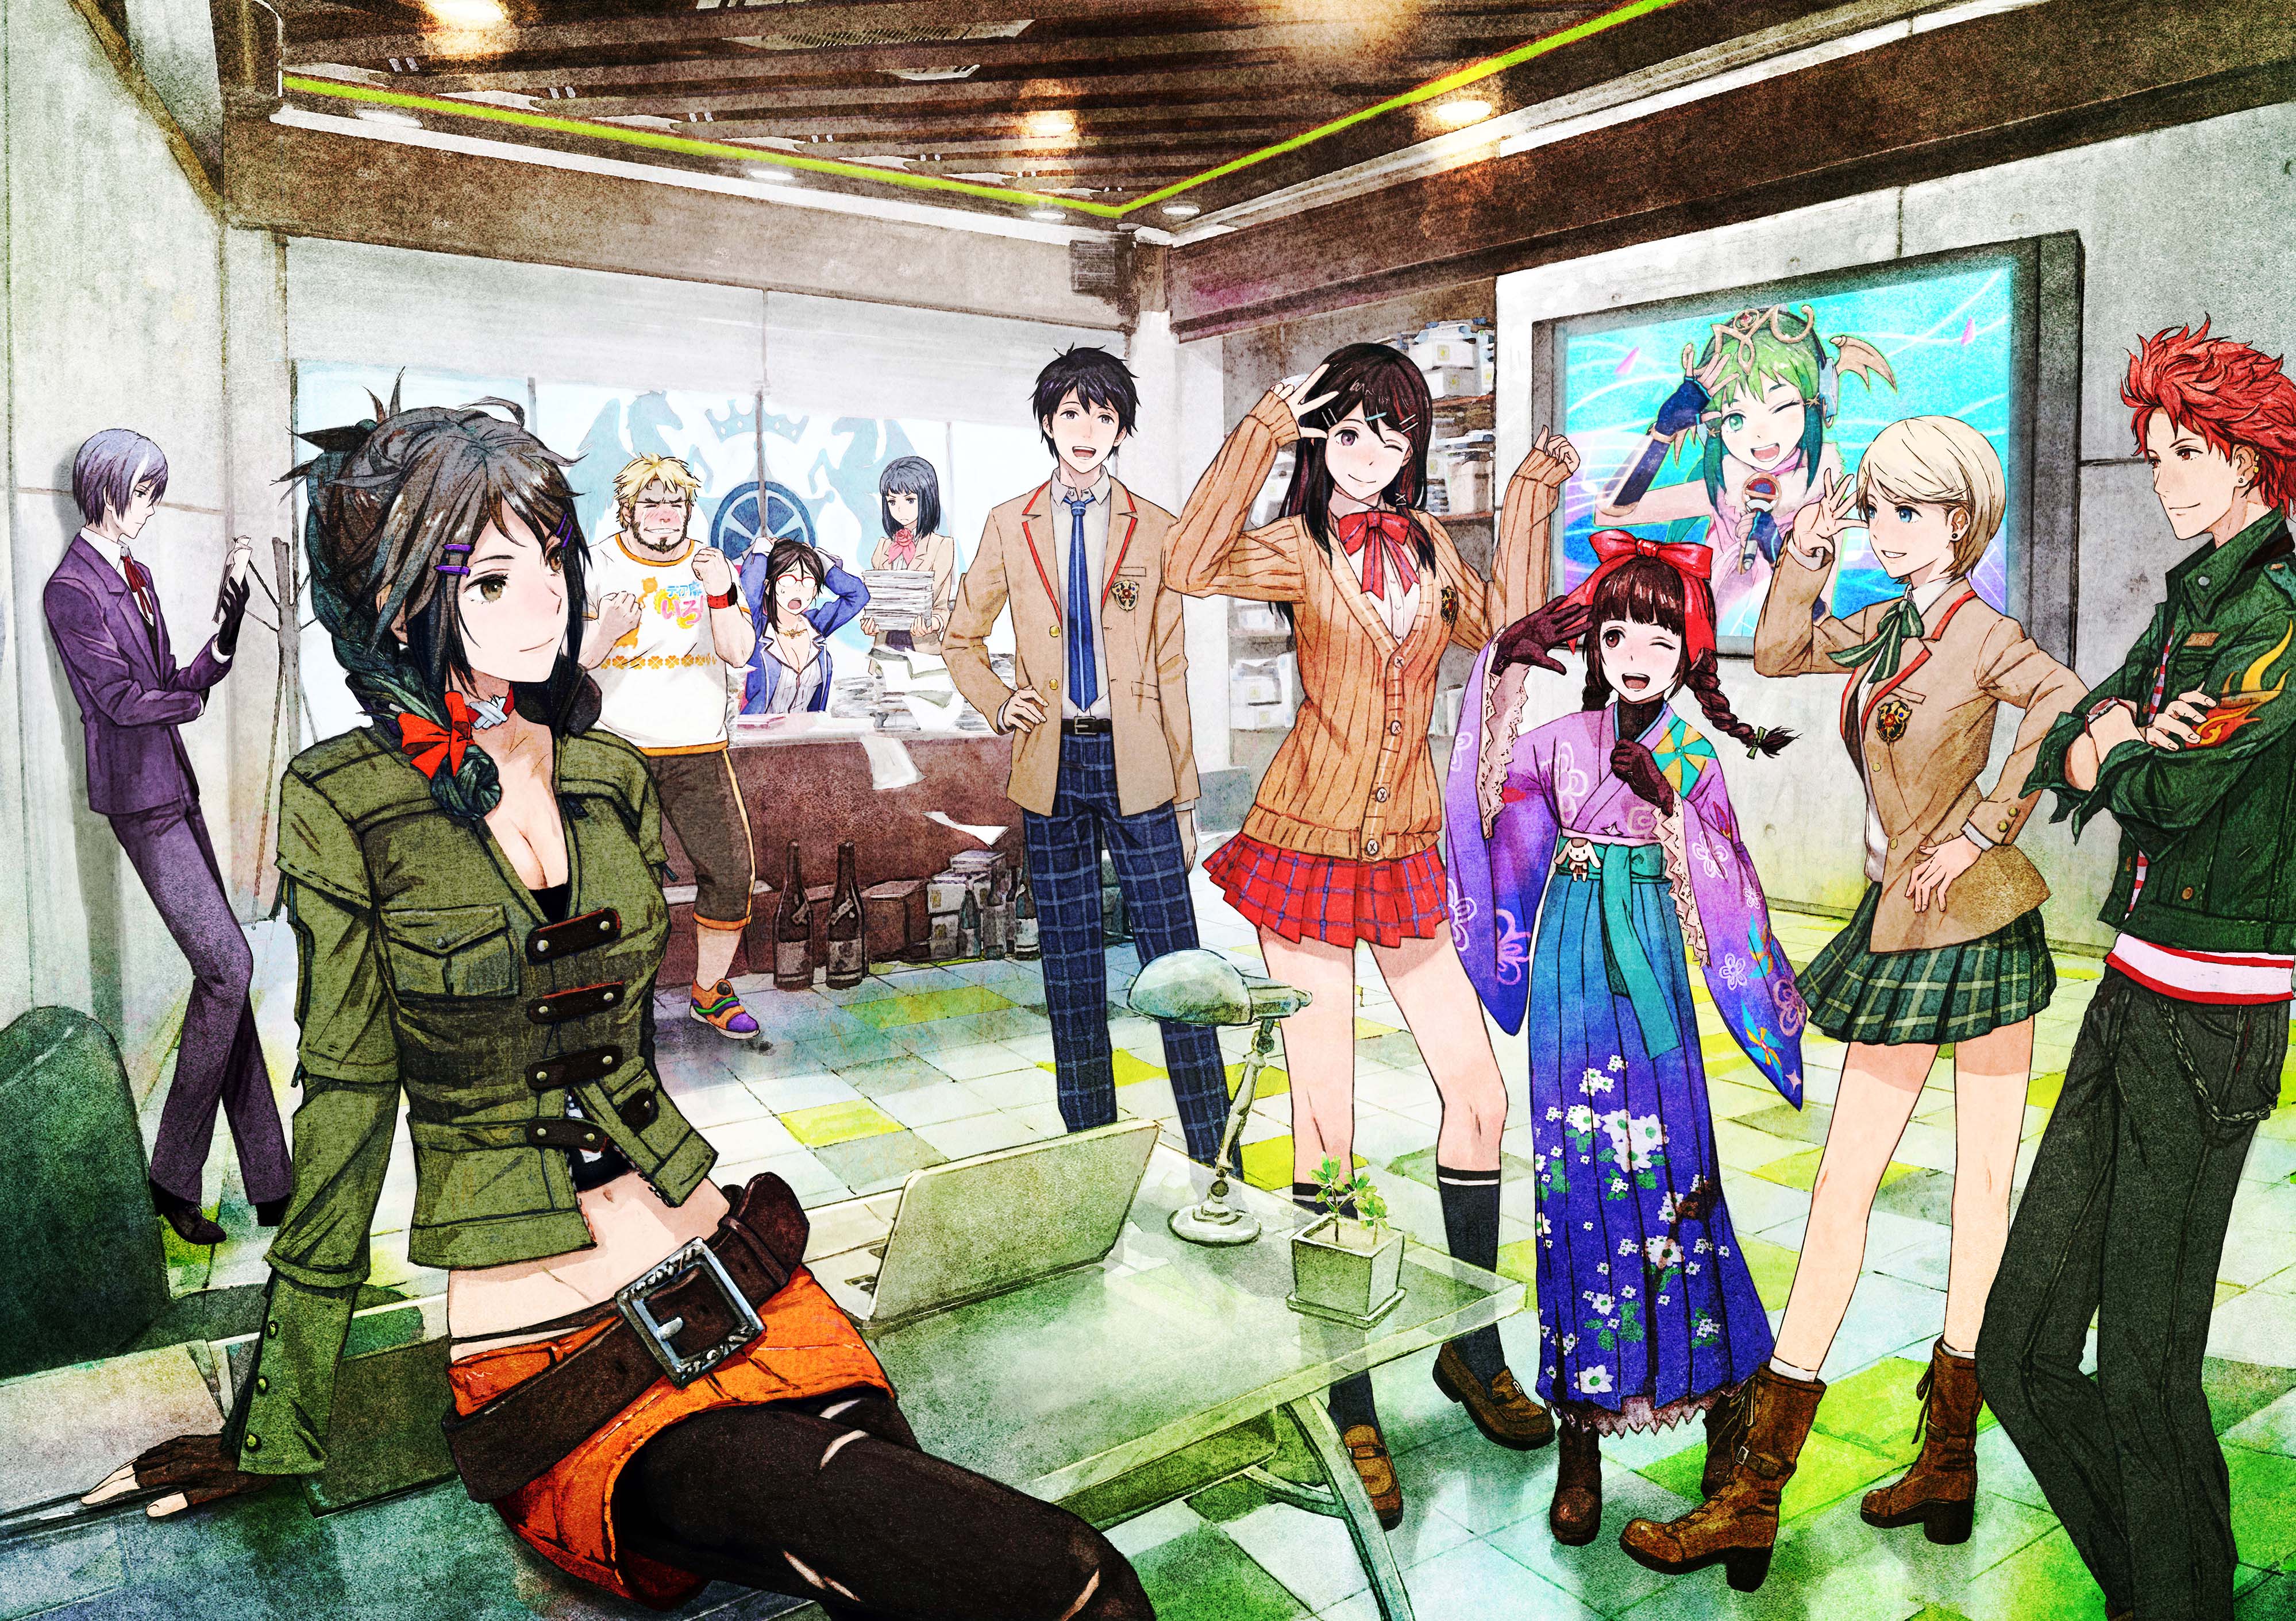 Tokyo Mirage Sessions #FE Backgrounds, Compatible - PC, Mobile, Gadgets| 3996x2822 px